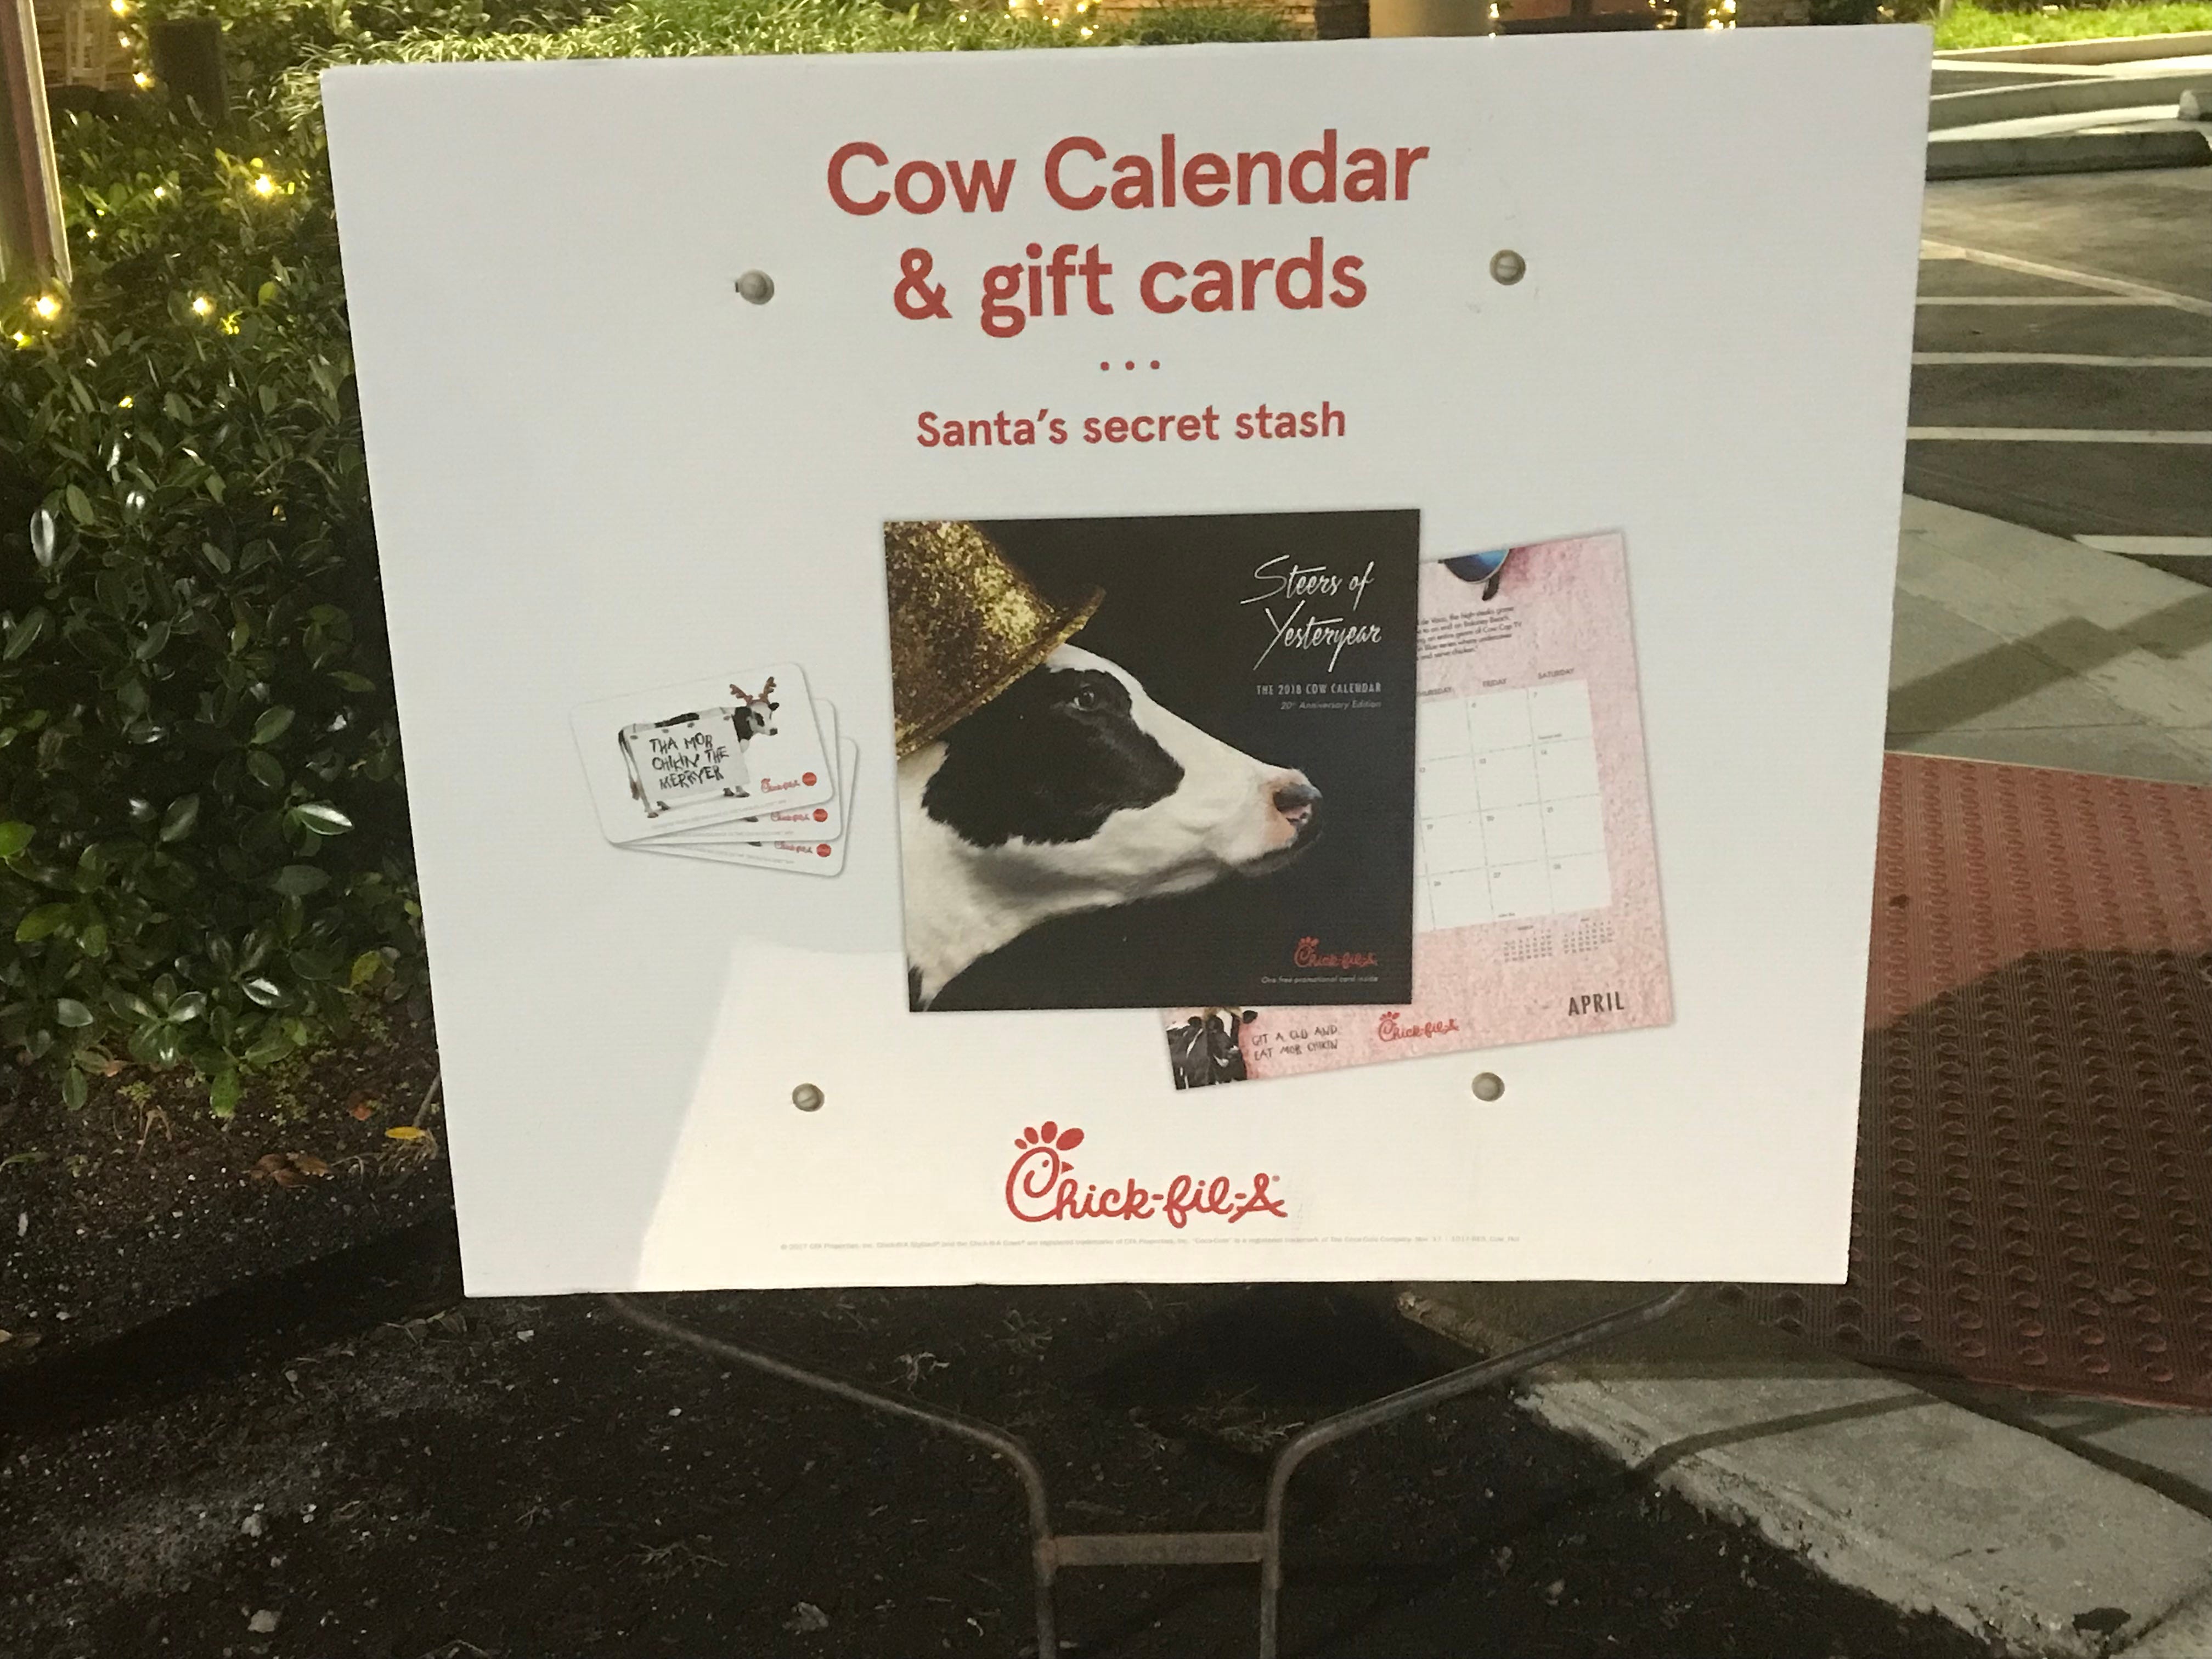 Chick-Fil-A Ending Popular Cow Calendar At End Of Year